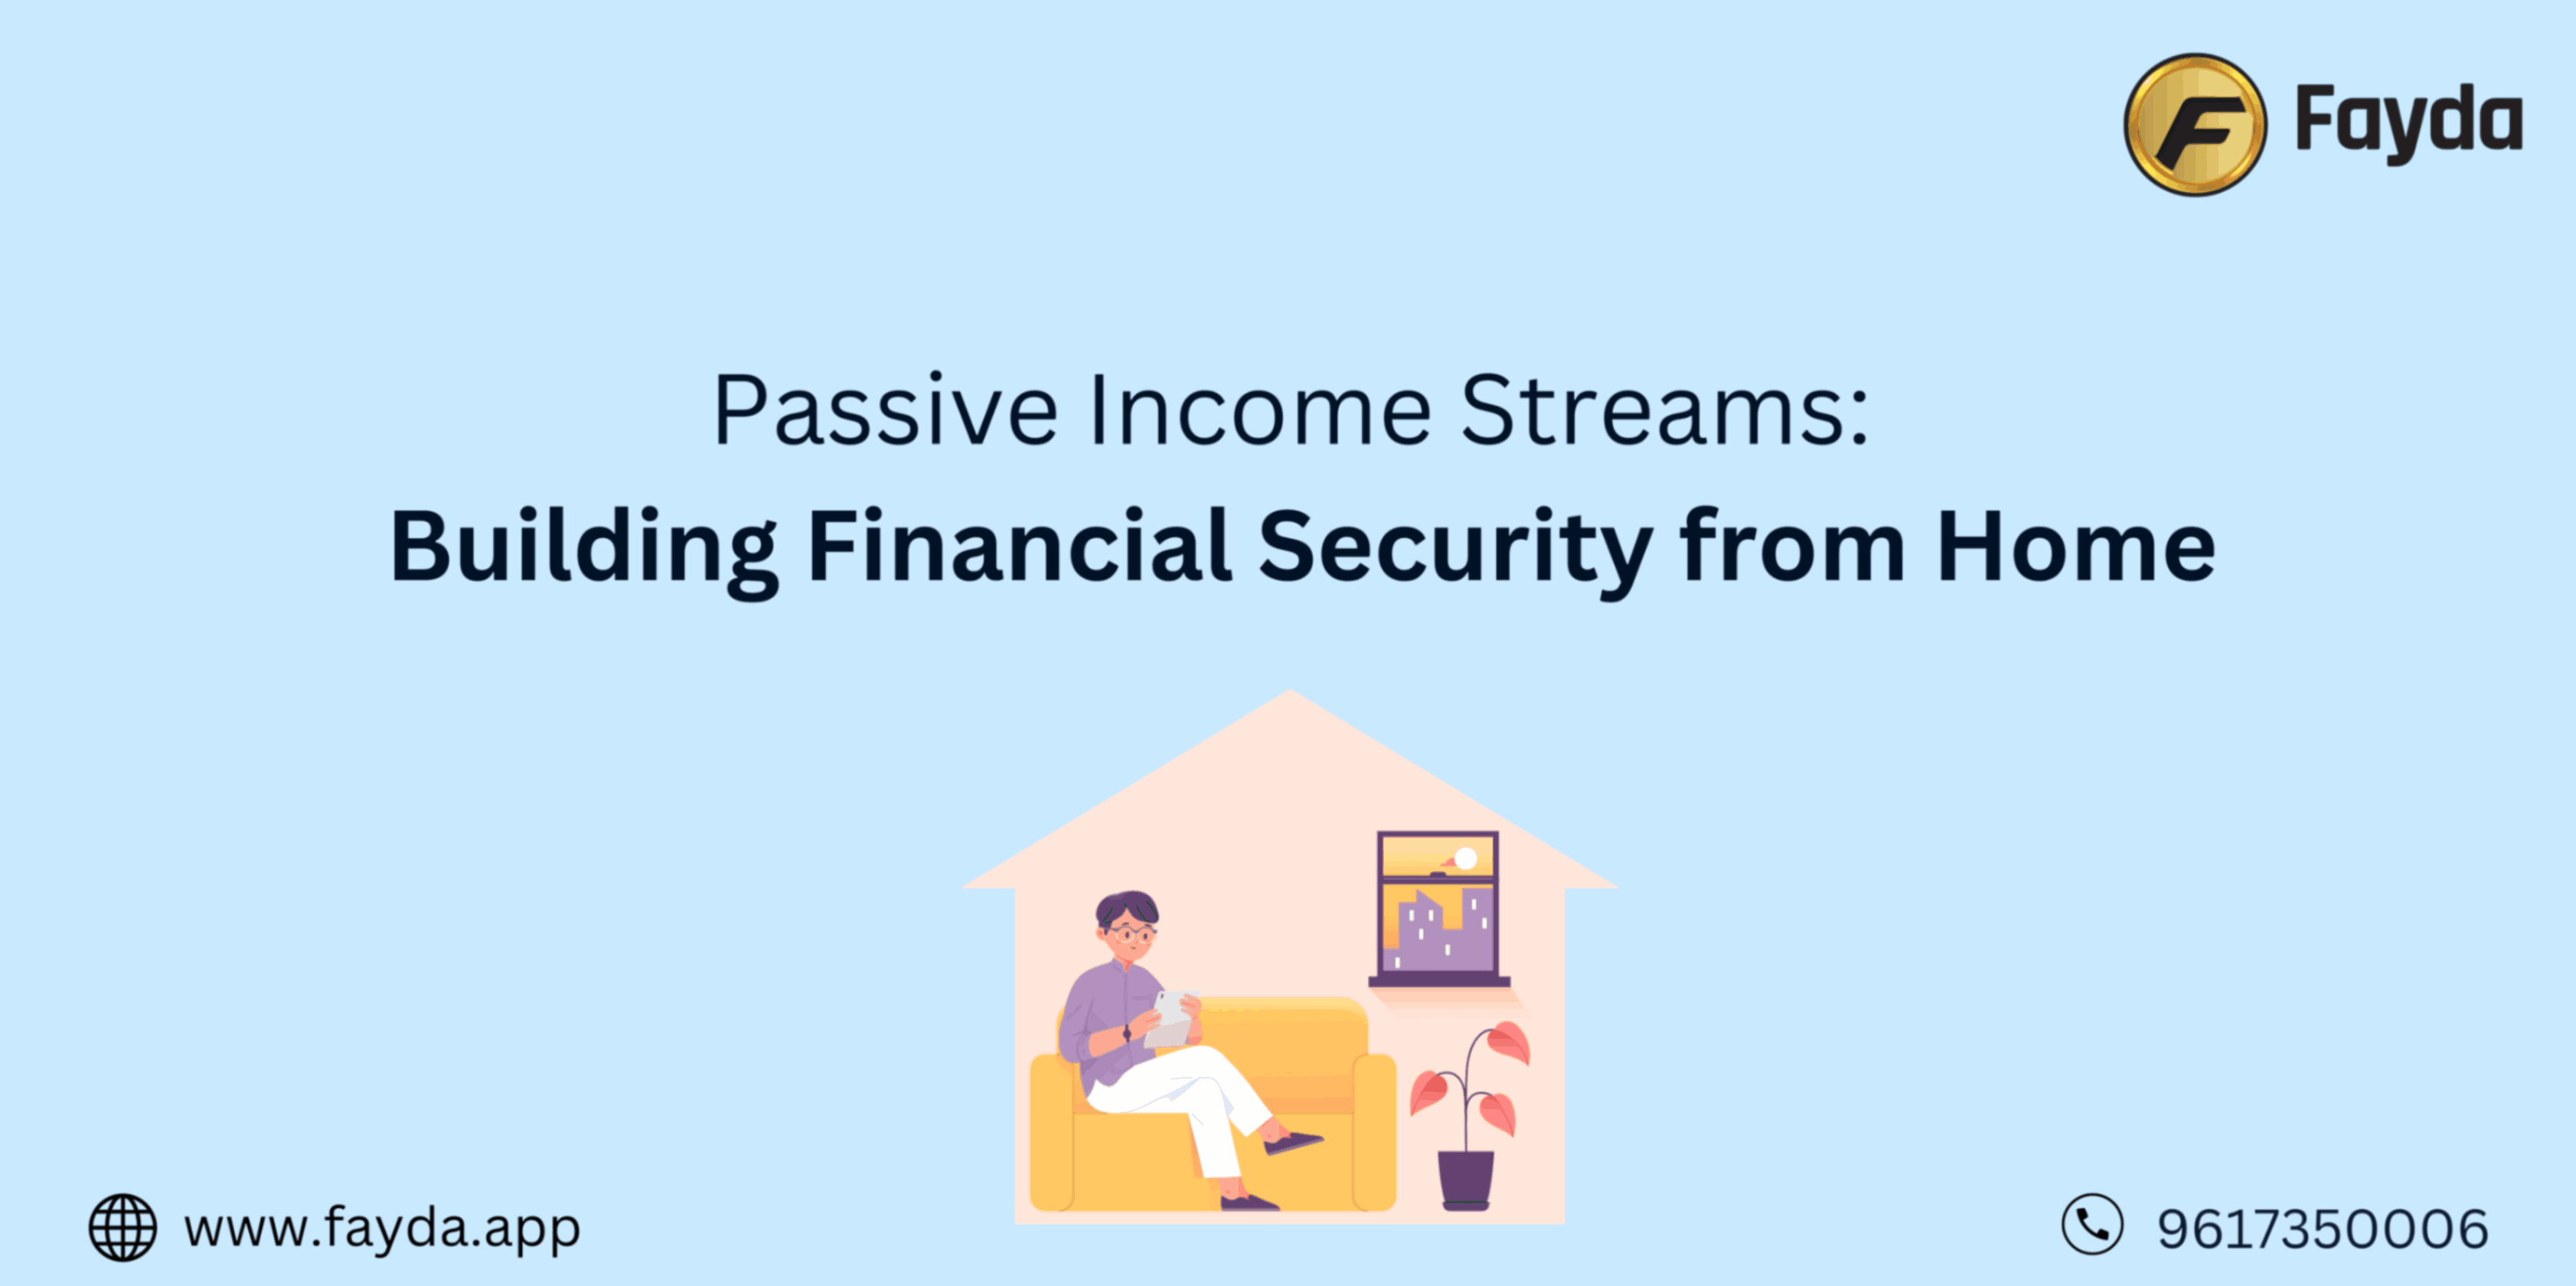 Passive Income Streams: Building Financial Security from Home